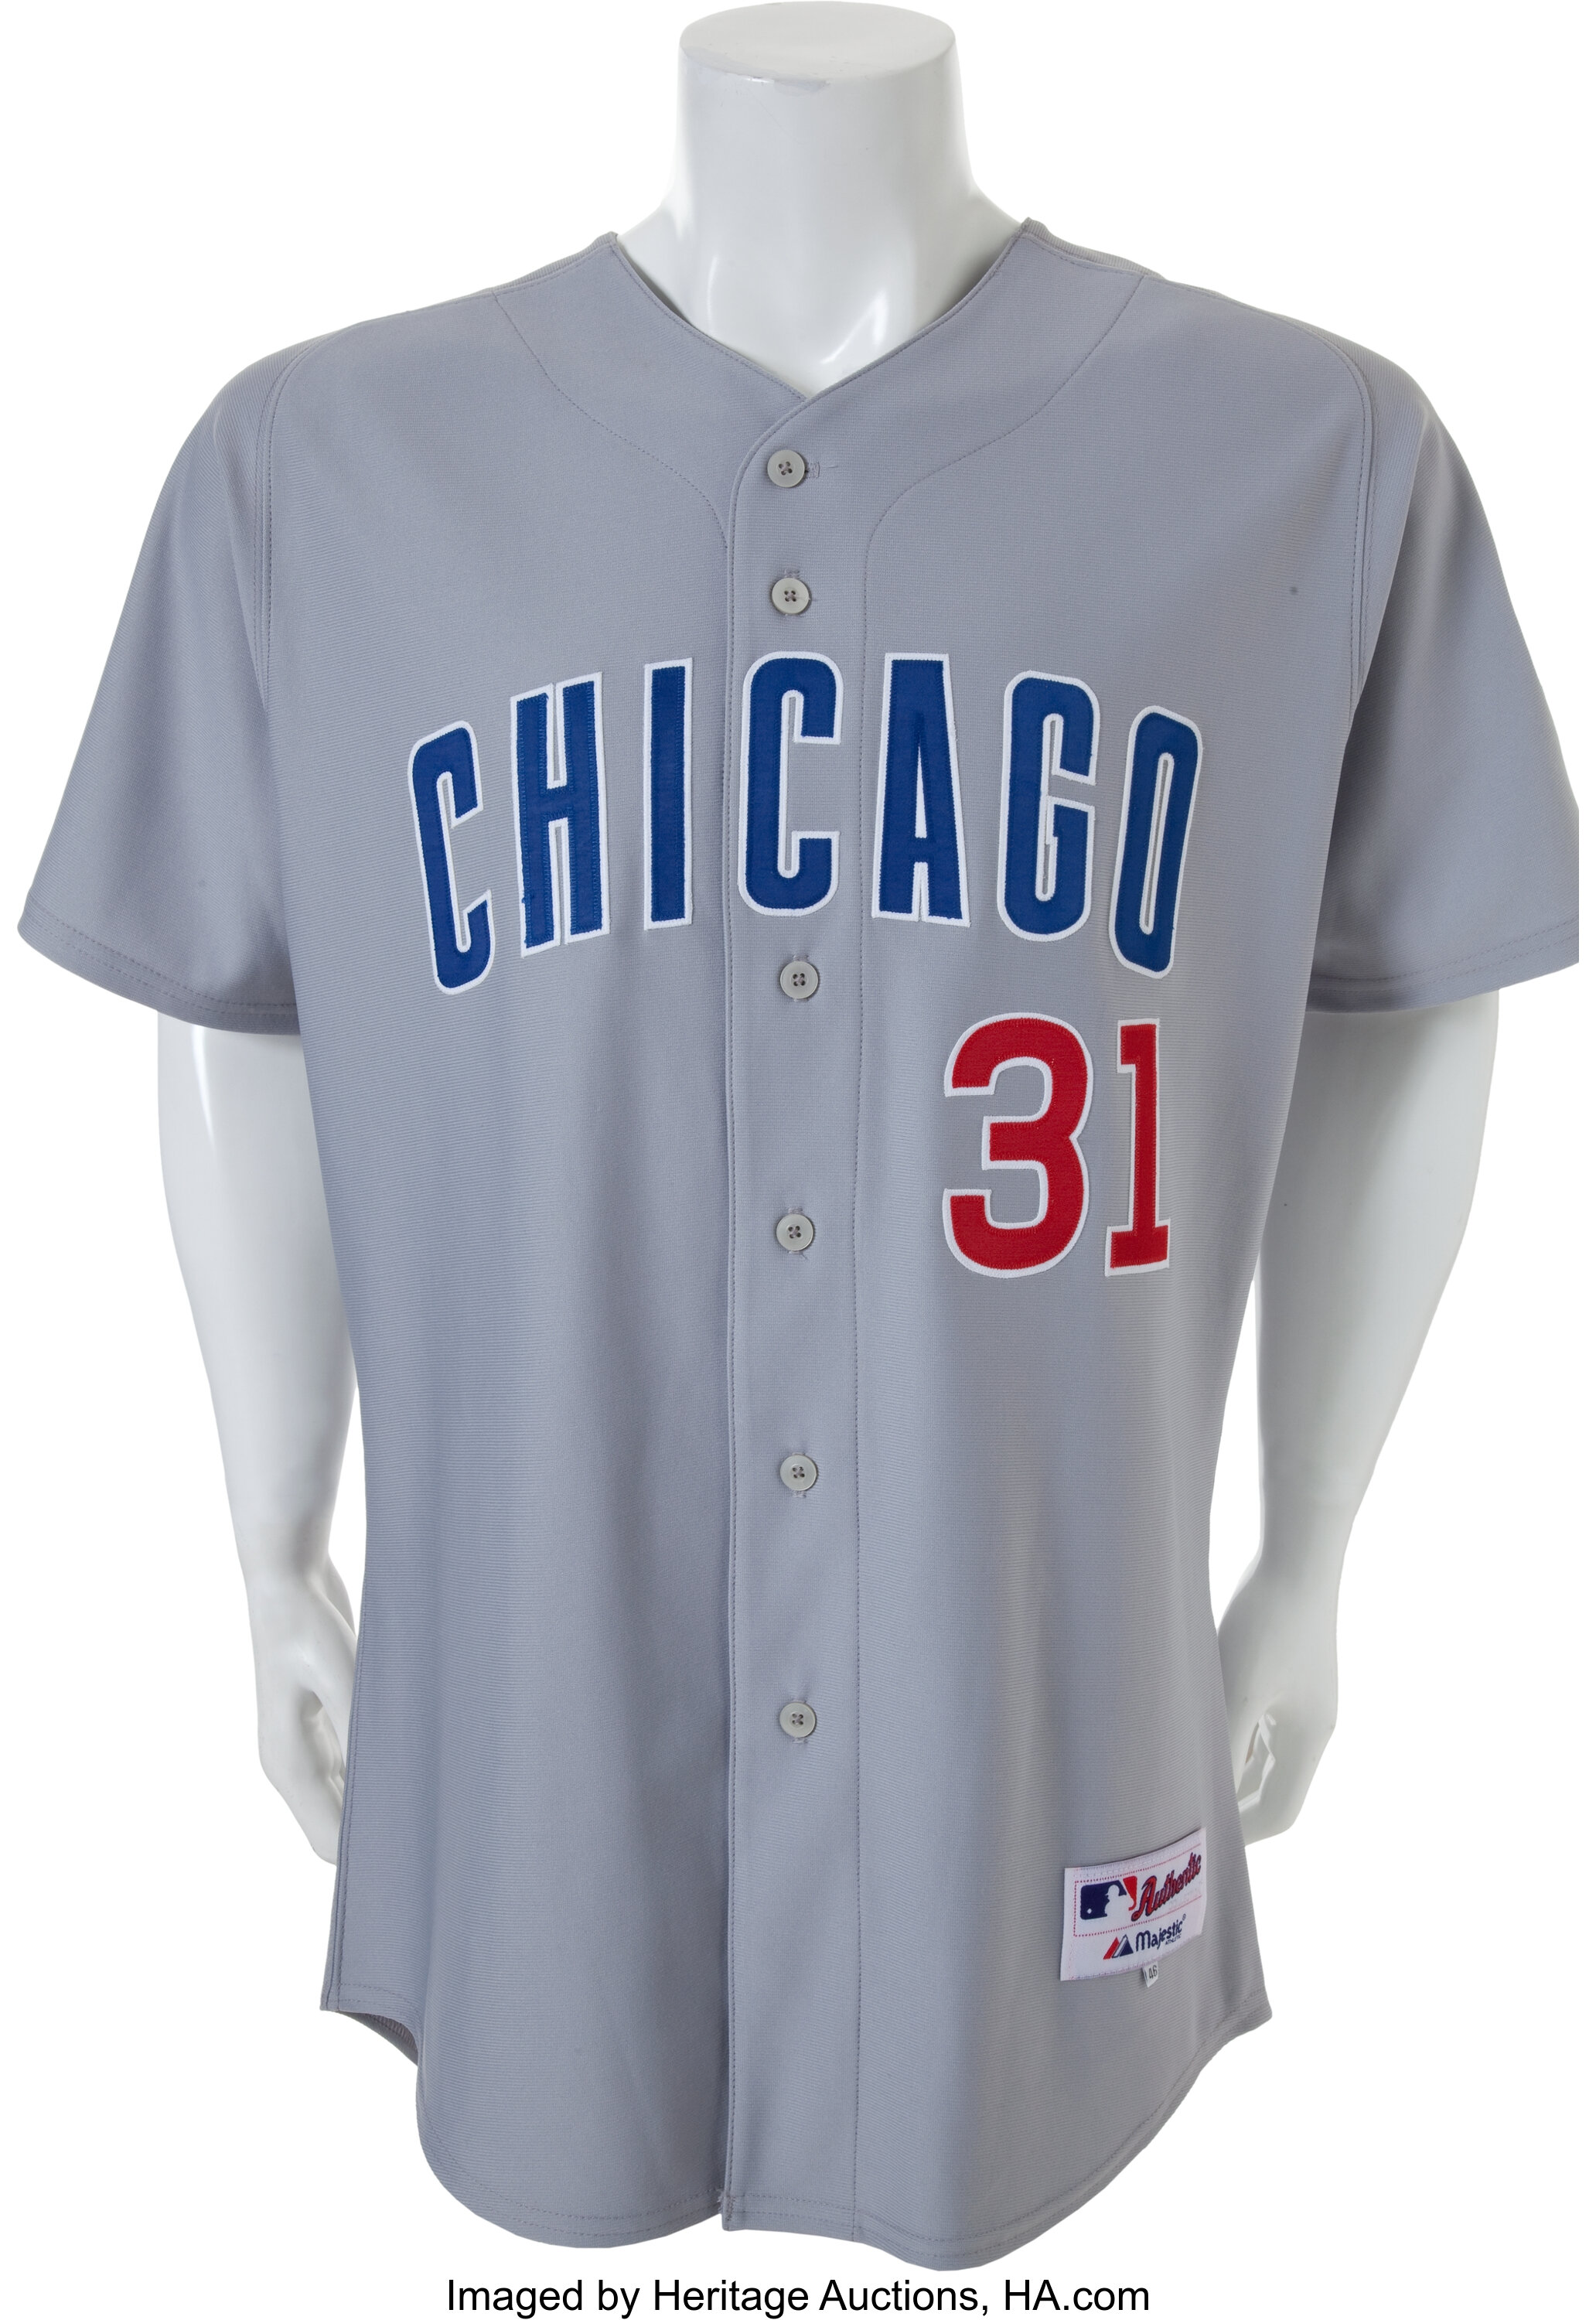 Chicago Cubs 1987 Greg Maddux Pullover Batting Practice Jersey